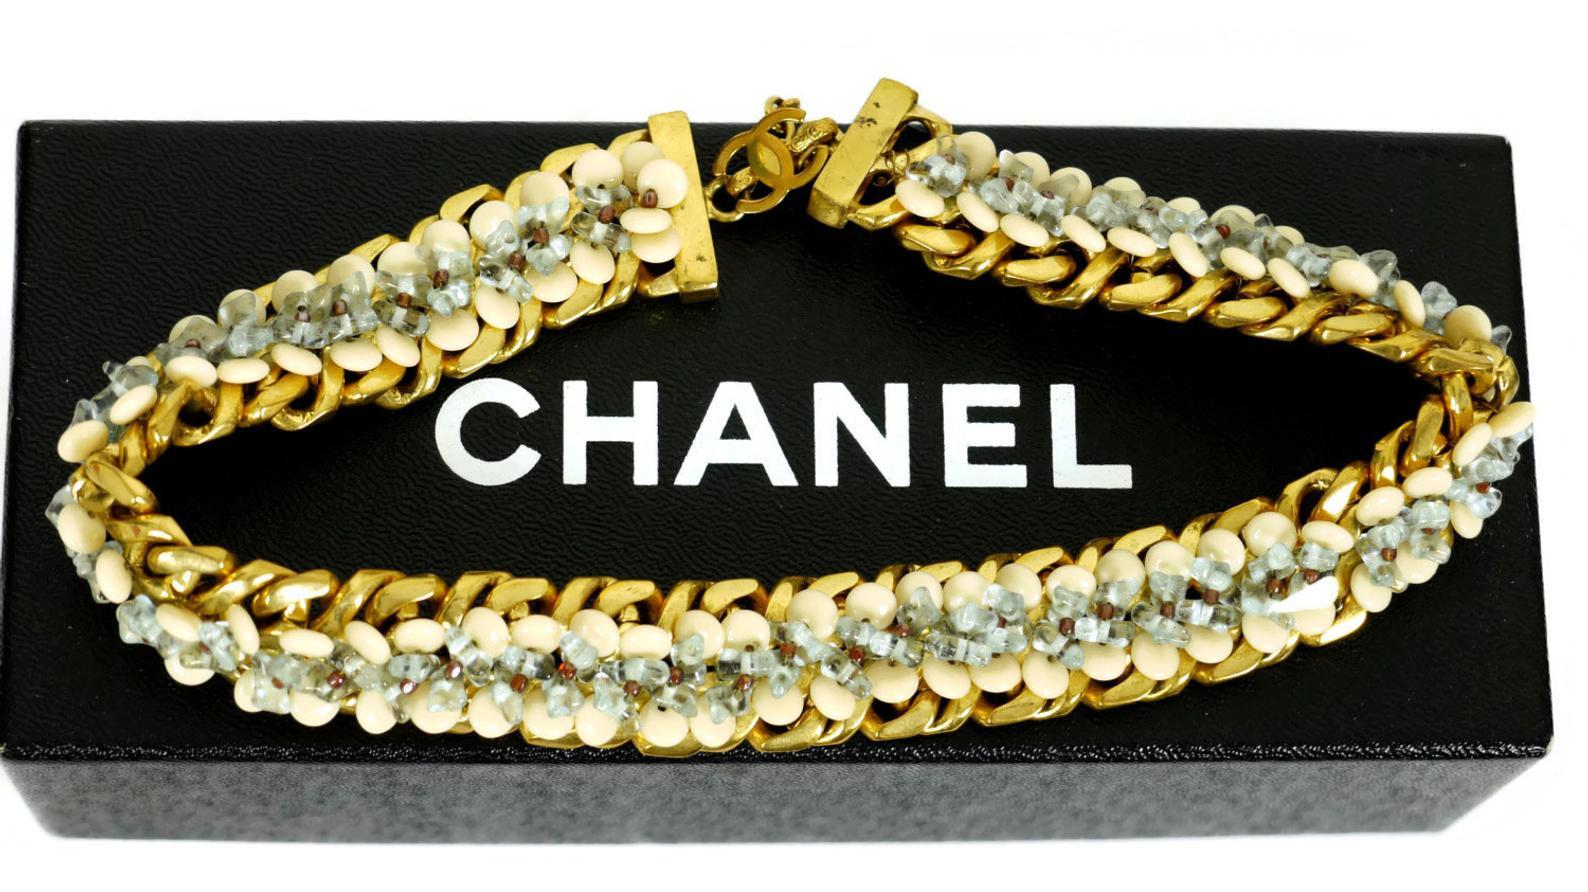 Vintage CHANEL Chunky Beaded Choker Necklace

Measurements:
Height: 7/8 inch
Wearable Length: 14 inches (minimum) to 16 1/4 inches (maximum)

Features:
- 100% Authentic CHANEL.
- Chunky chain choker in gold tone.
- Cream and lavander glass bead